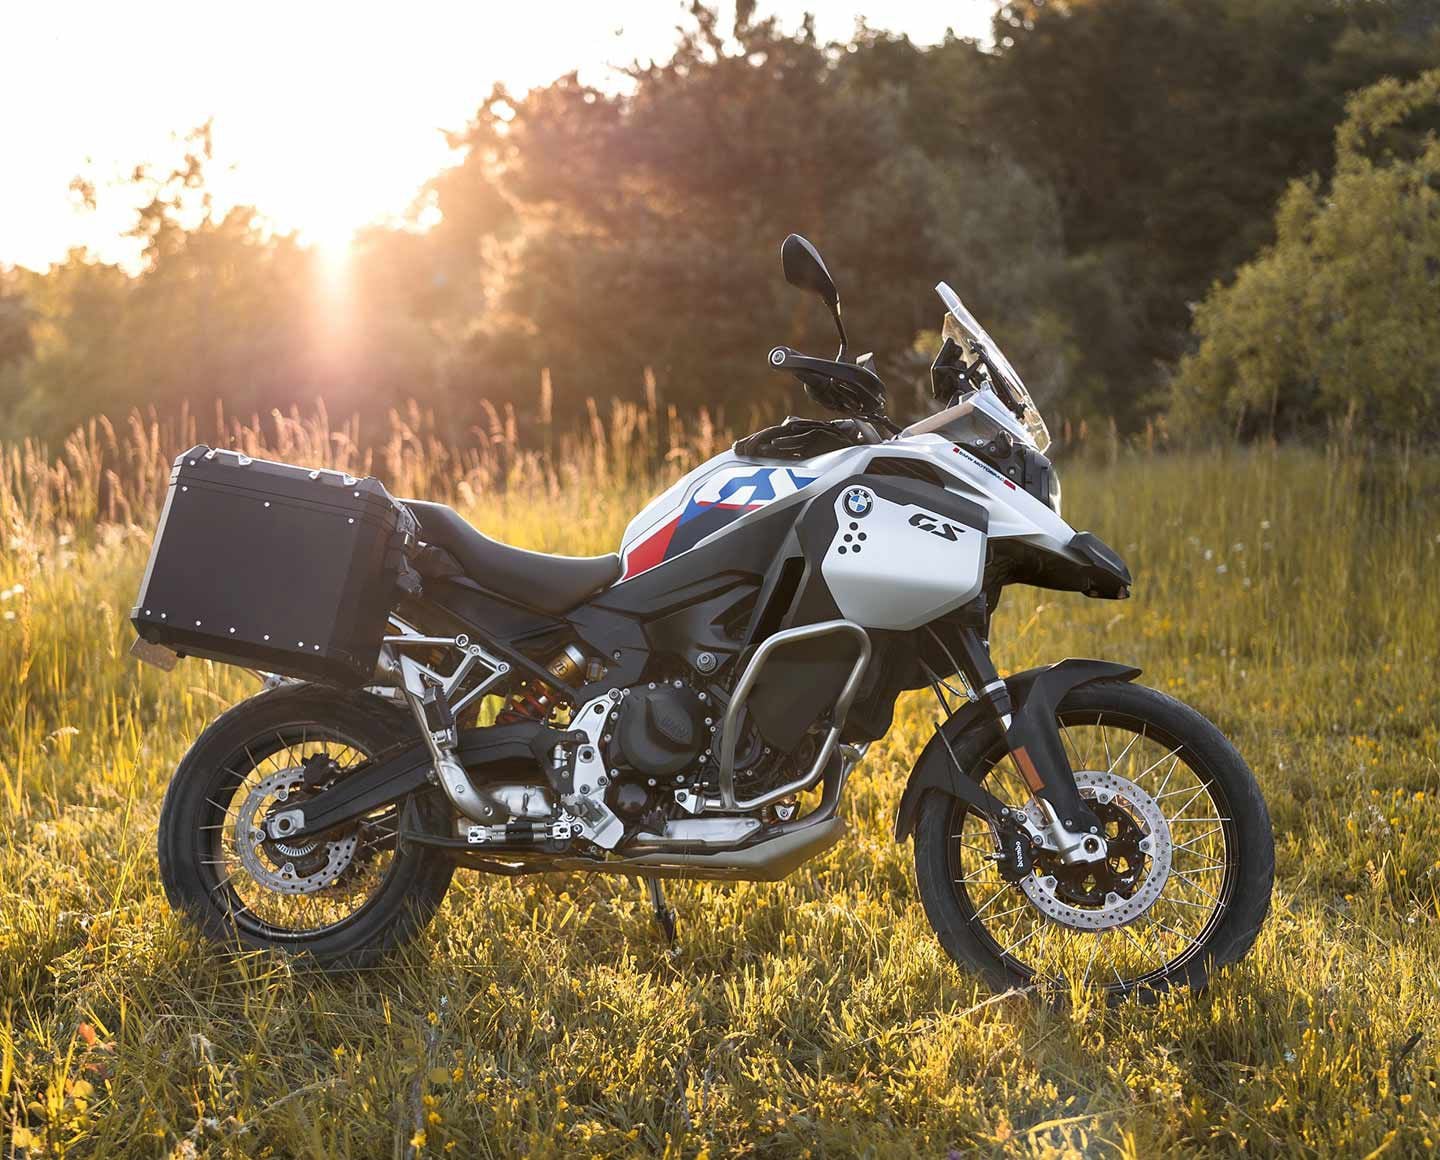 The 2024 BMW F 900 Adventure drops some weight and adds the new engine and suspension, but retains its larger 6-gallon fuel tank and bulkier tailsection.